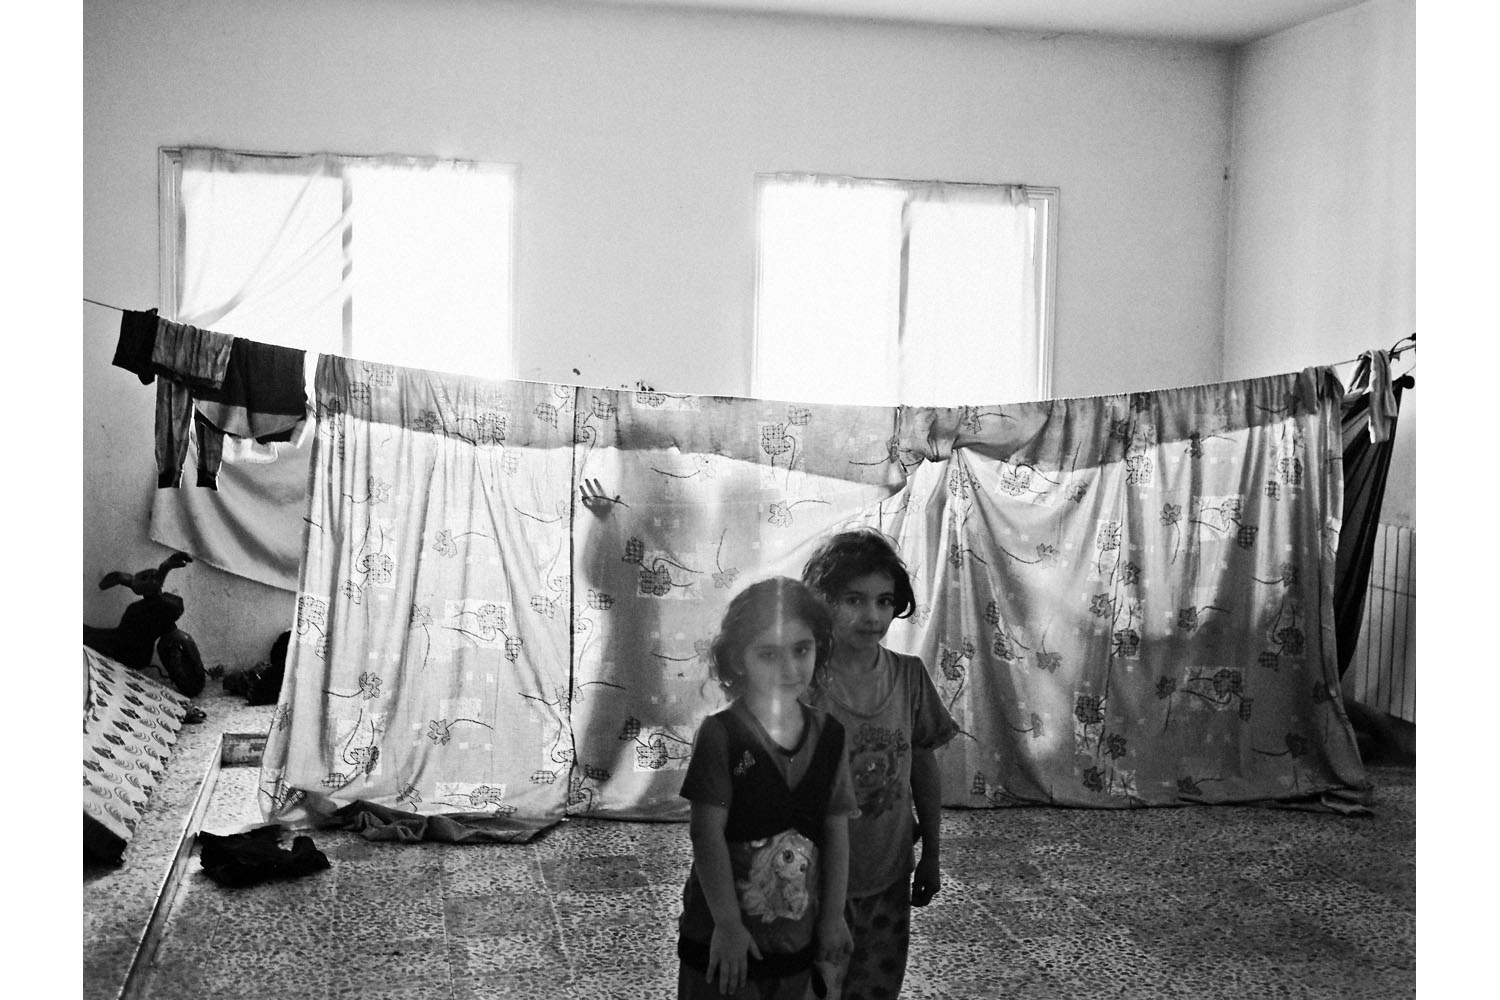 Tekrit, north Lebanon. June 2013.A Syrian family in a classroom that is not their home in a school occupied by Syrian refugees in the village of Tekrit, north Lebanon.(Photo by Moises Saman/MAGNUM)